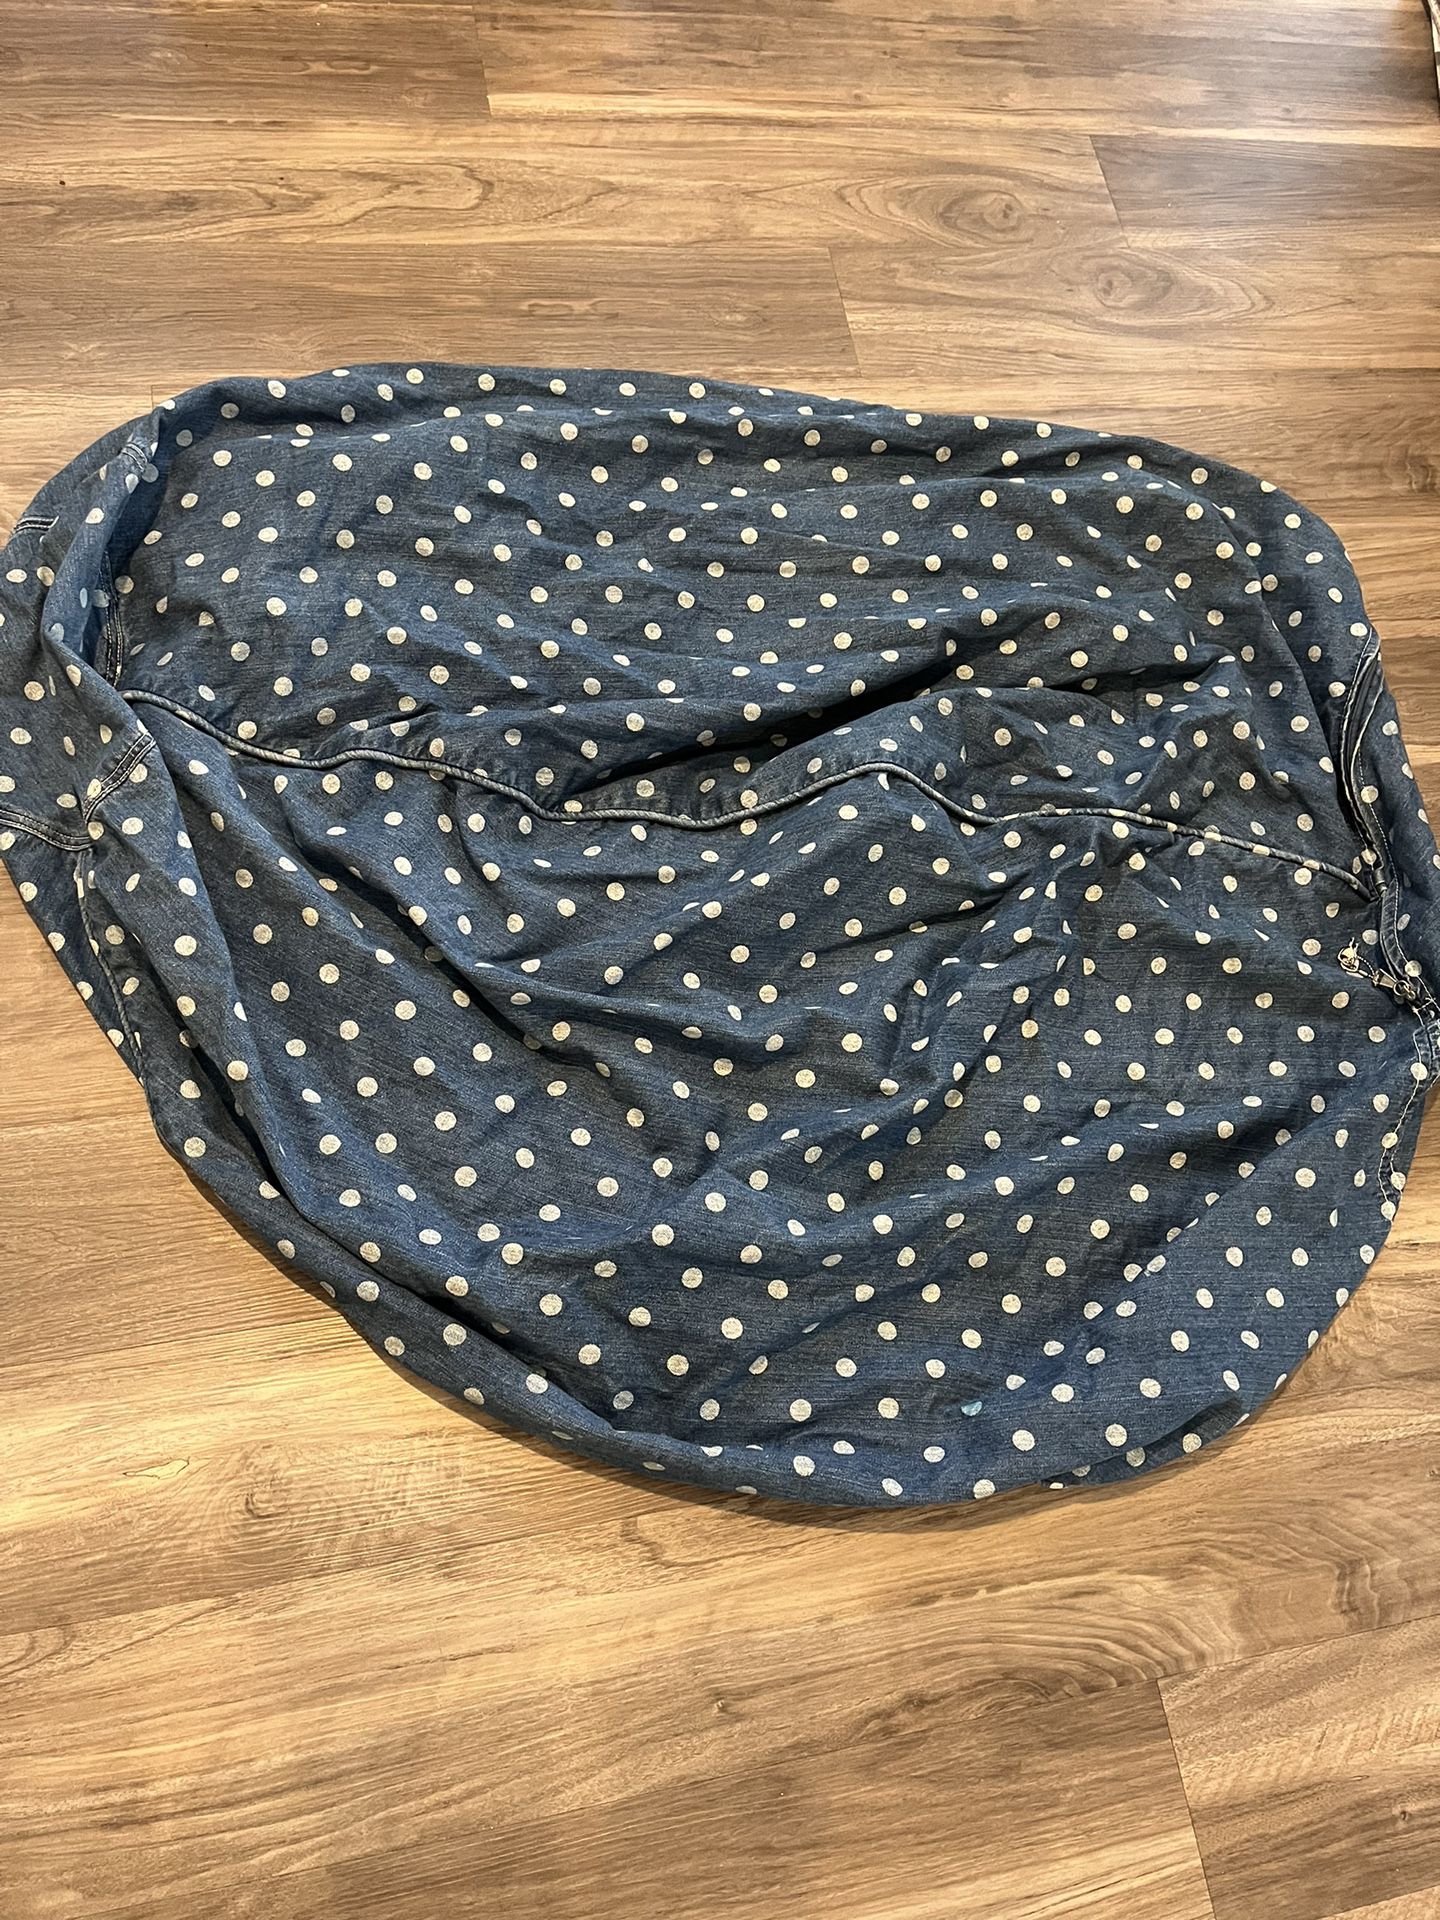 **open to offers** Pottery Barn bean bag chair cover, size  large 41" diameter